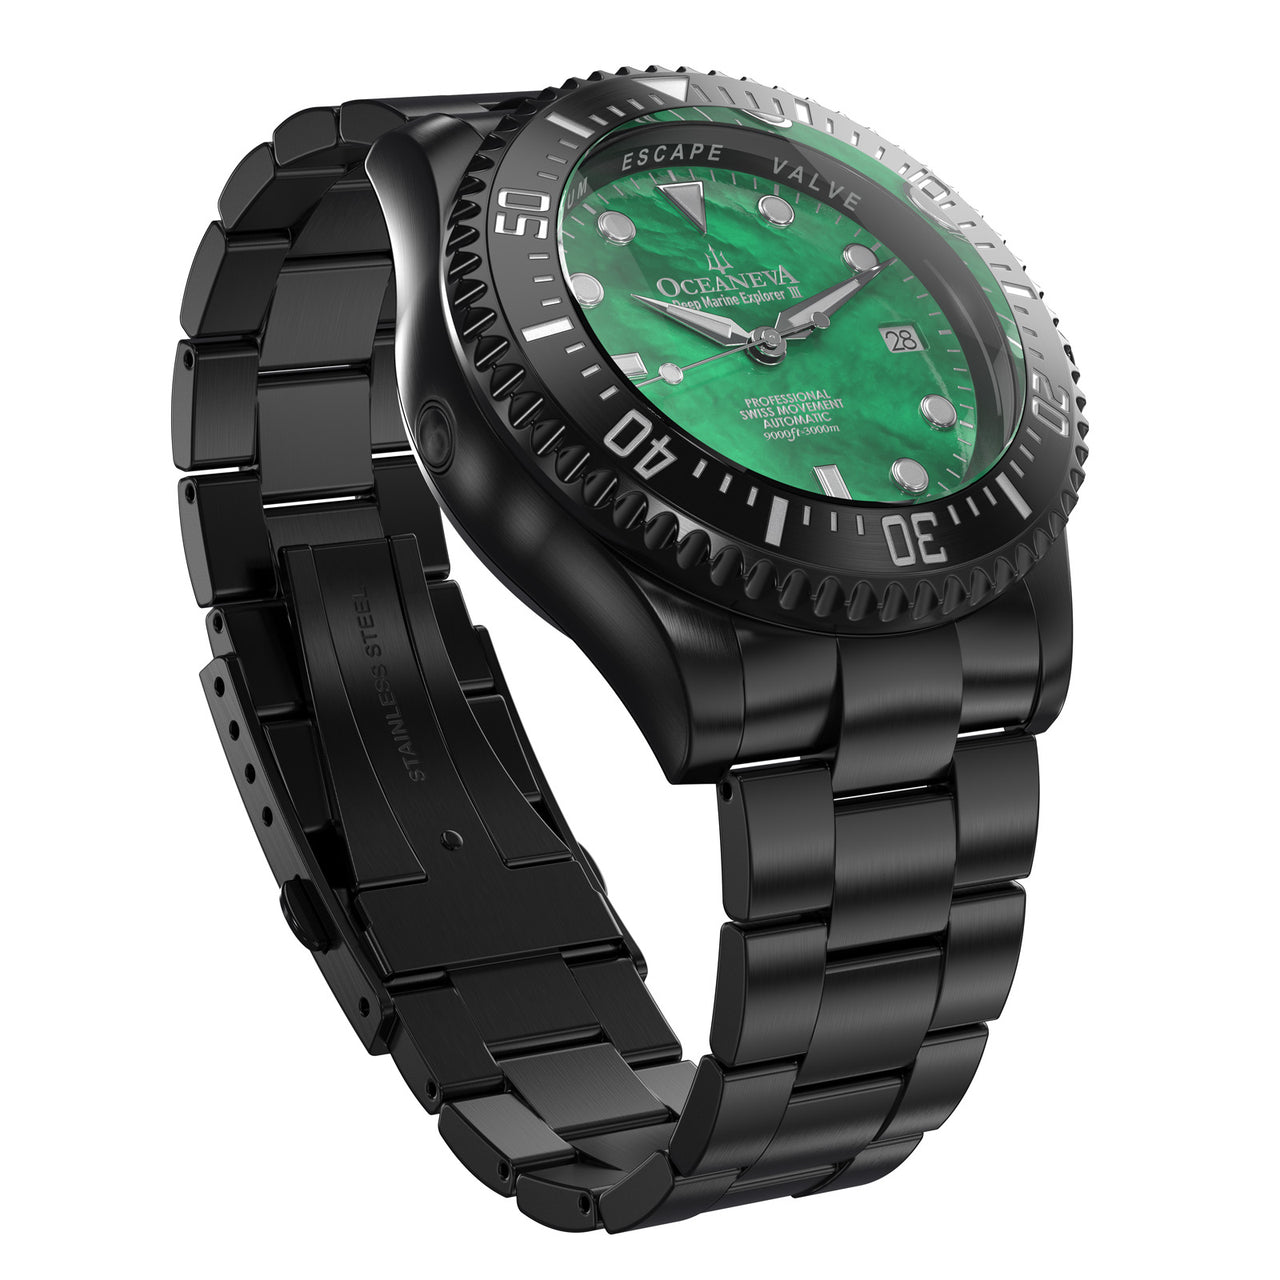 Oceaneva 3000M Dive Watch Green Mother of Pearl Front Picture Slight Right Slant View